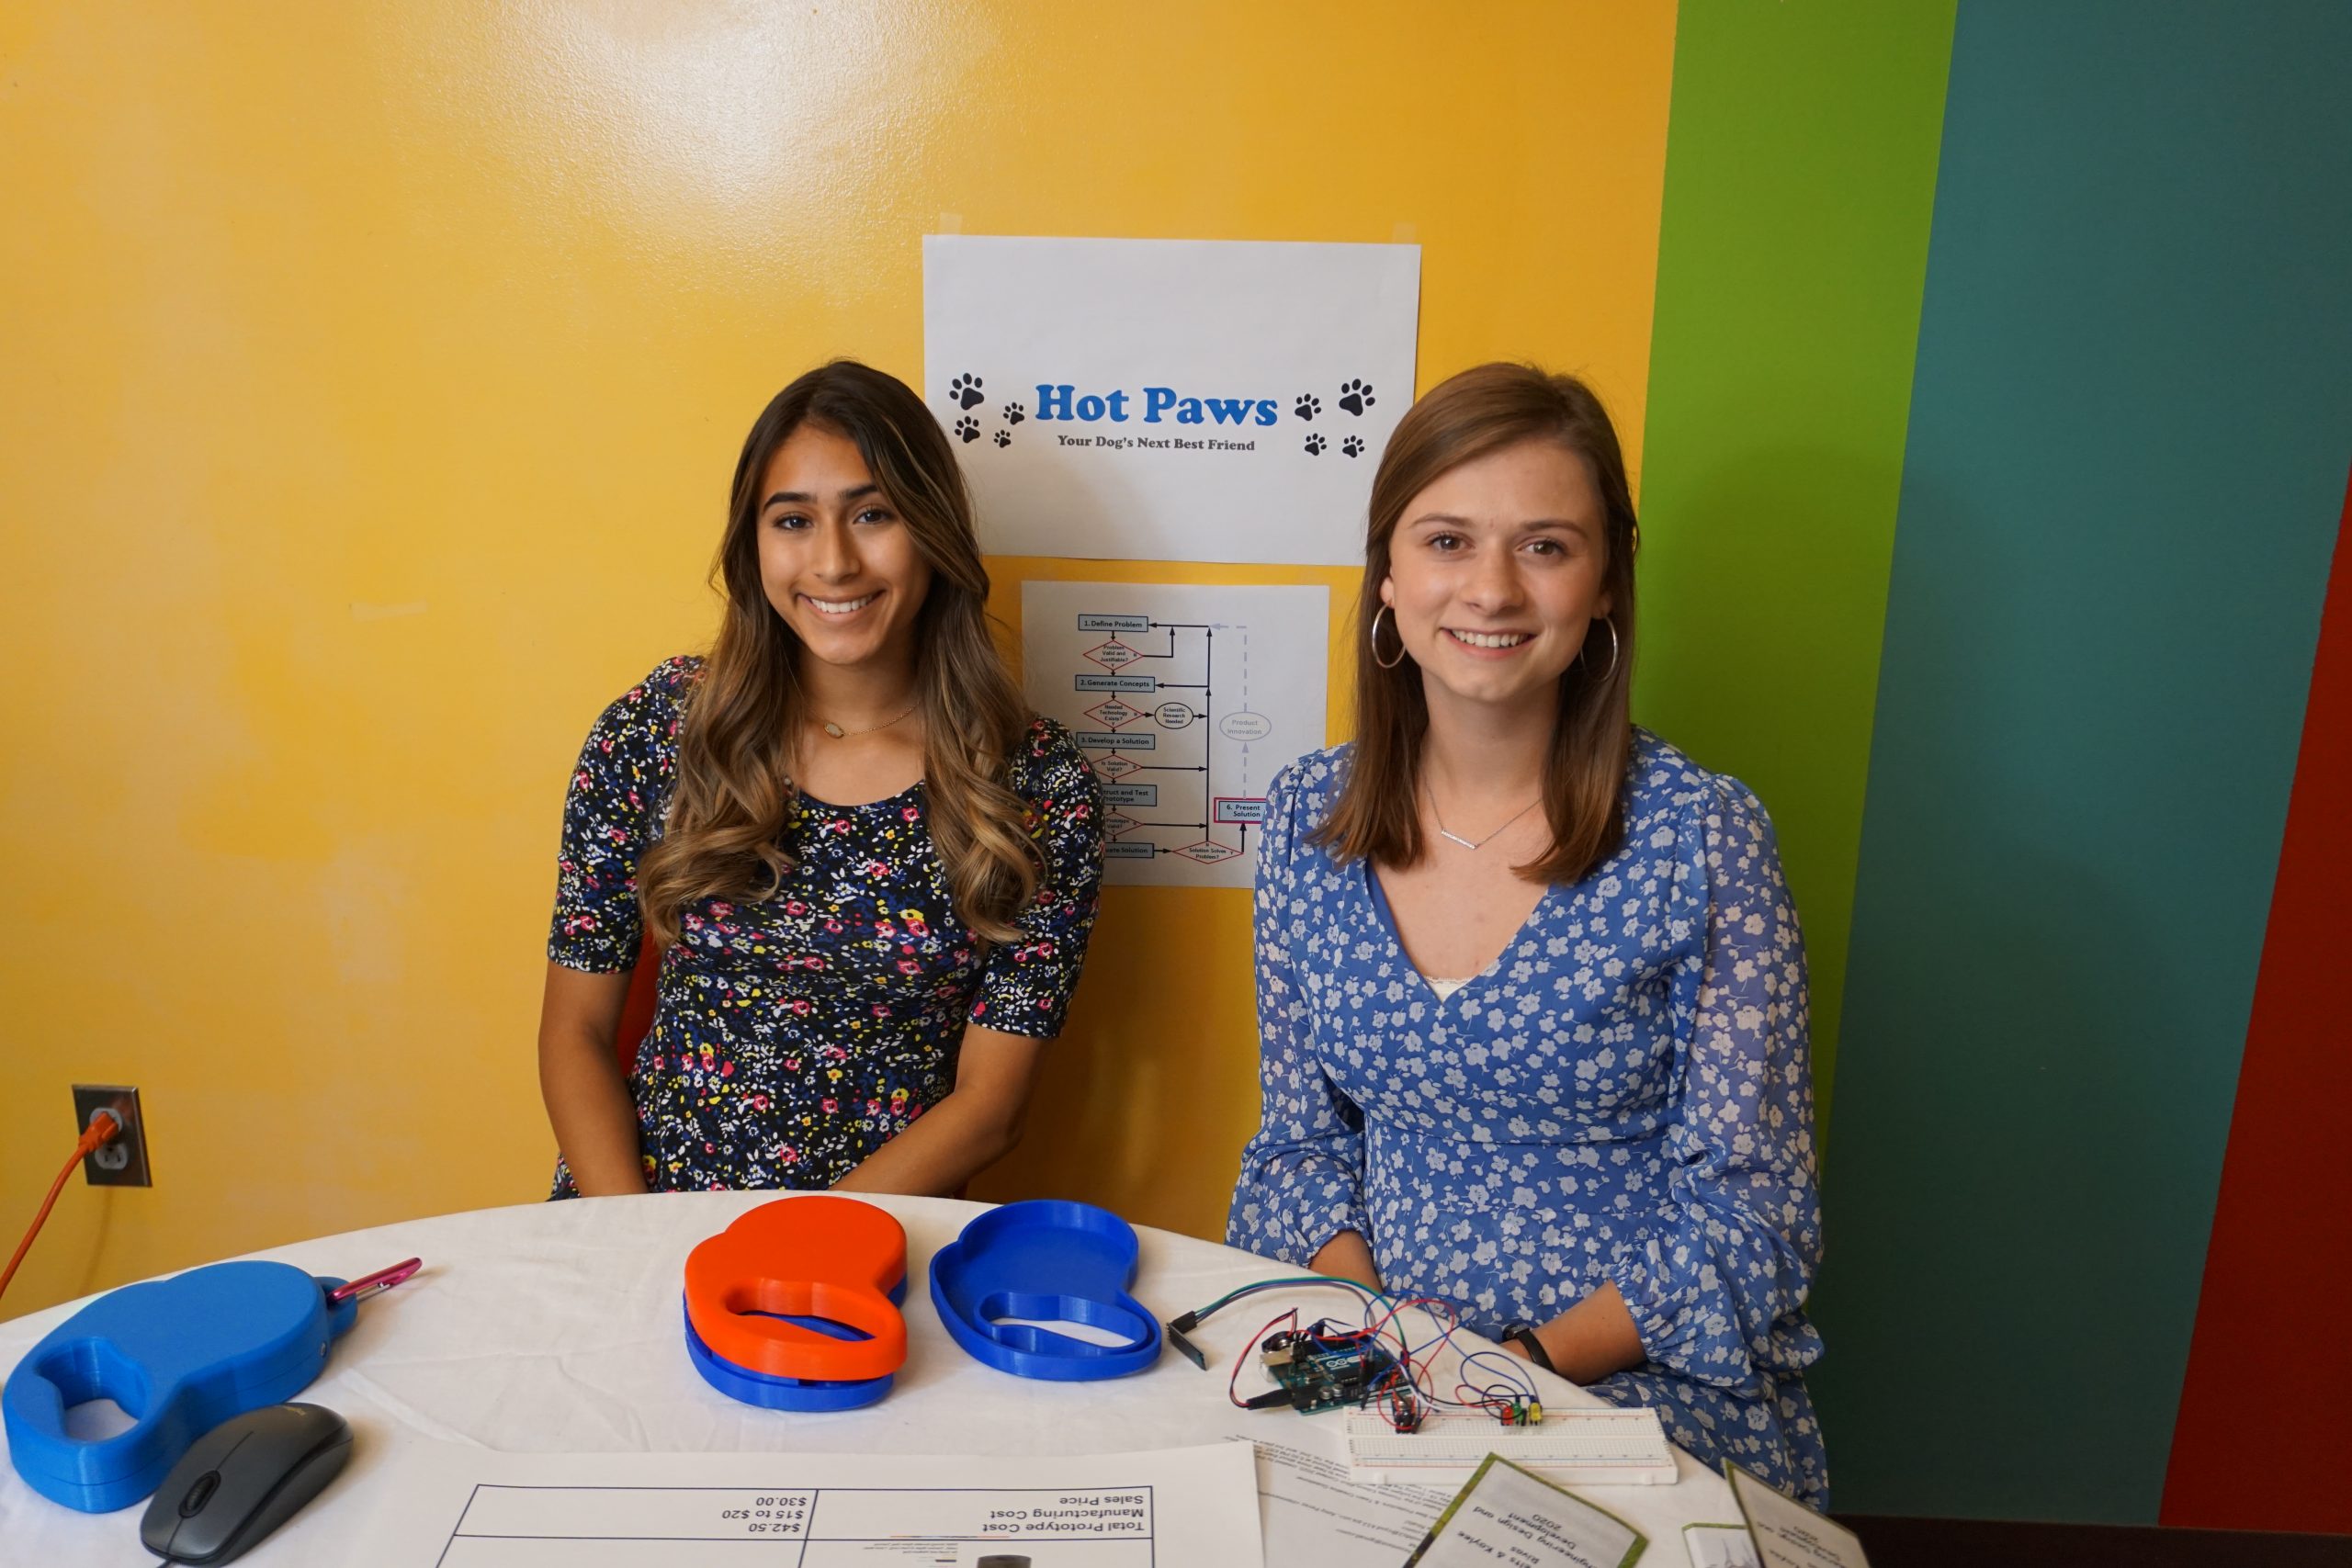 Hewitt-Trussville High School students win national competition with Hot Paws invention